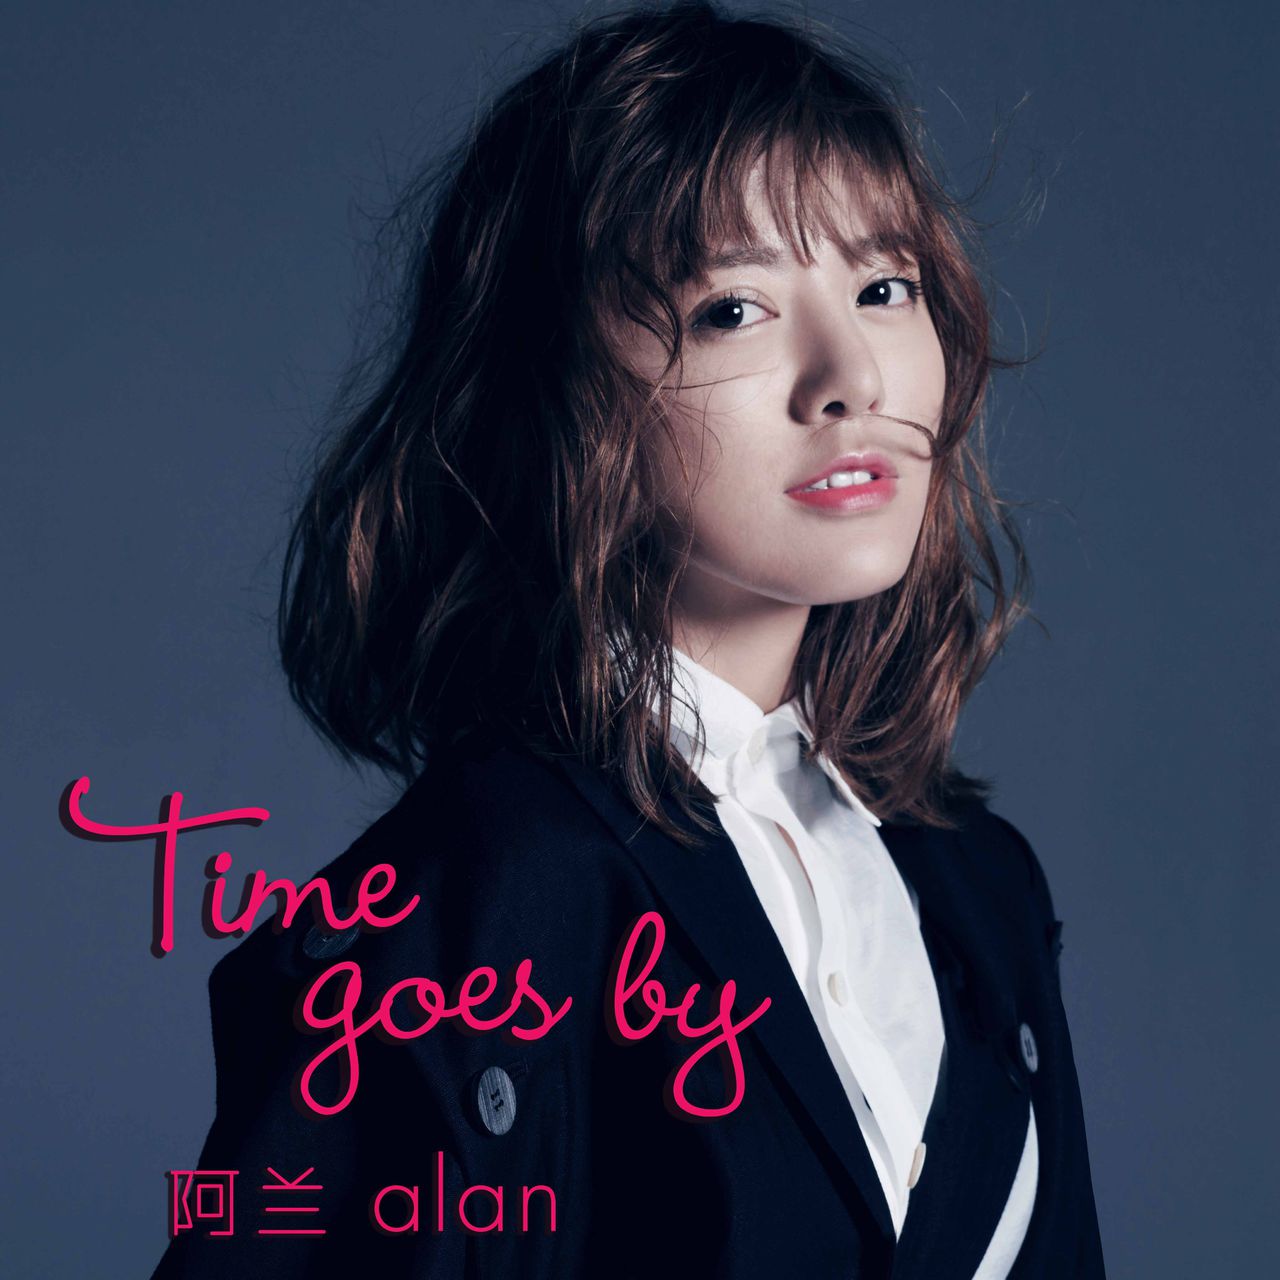 Time goes by(阿蘭演唱歌曲)